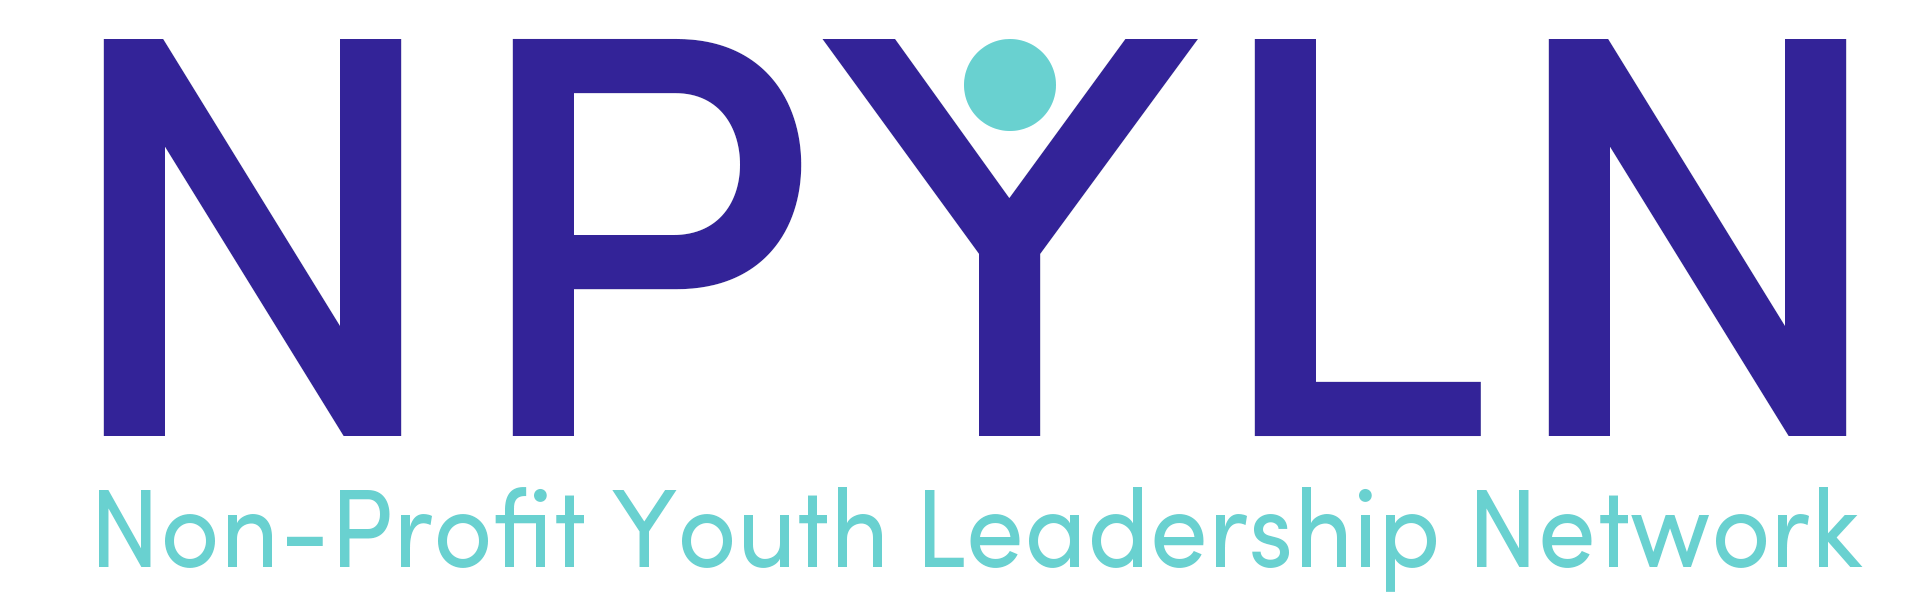 Nonprofit youth leadership.png